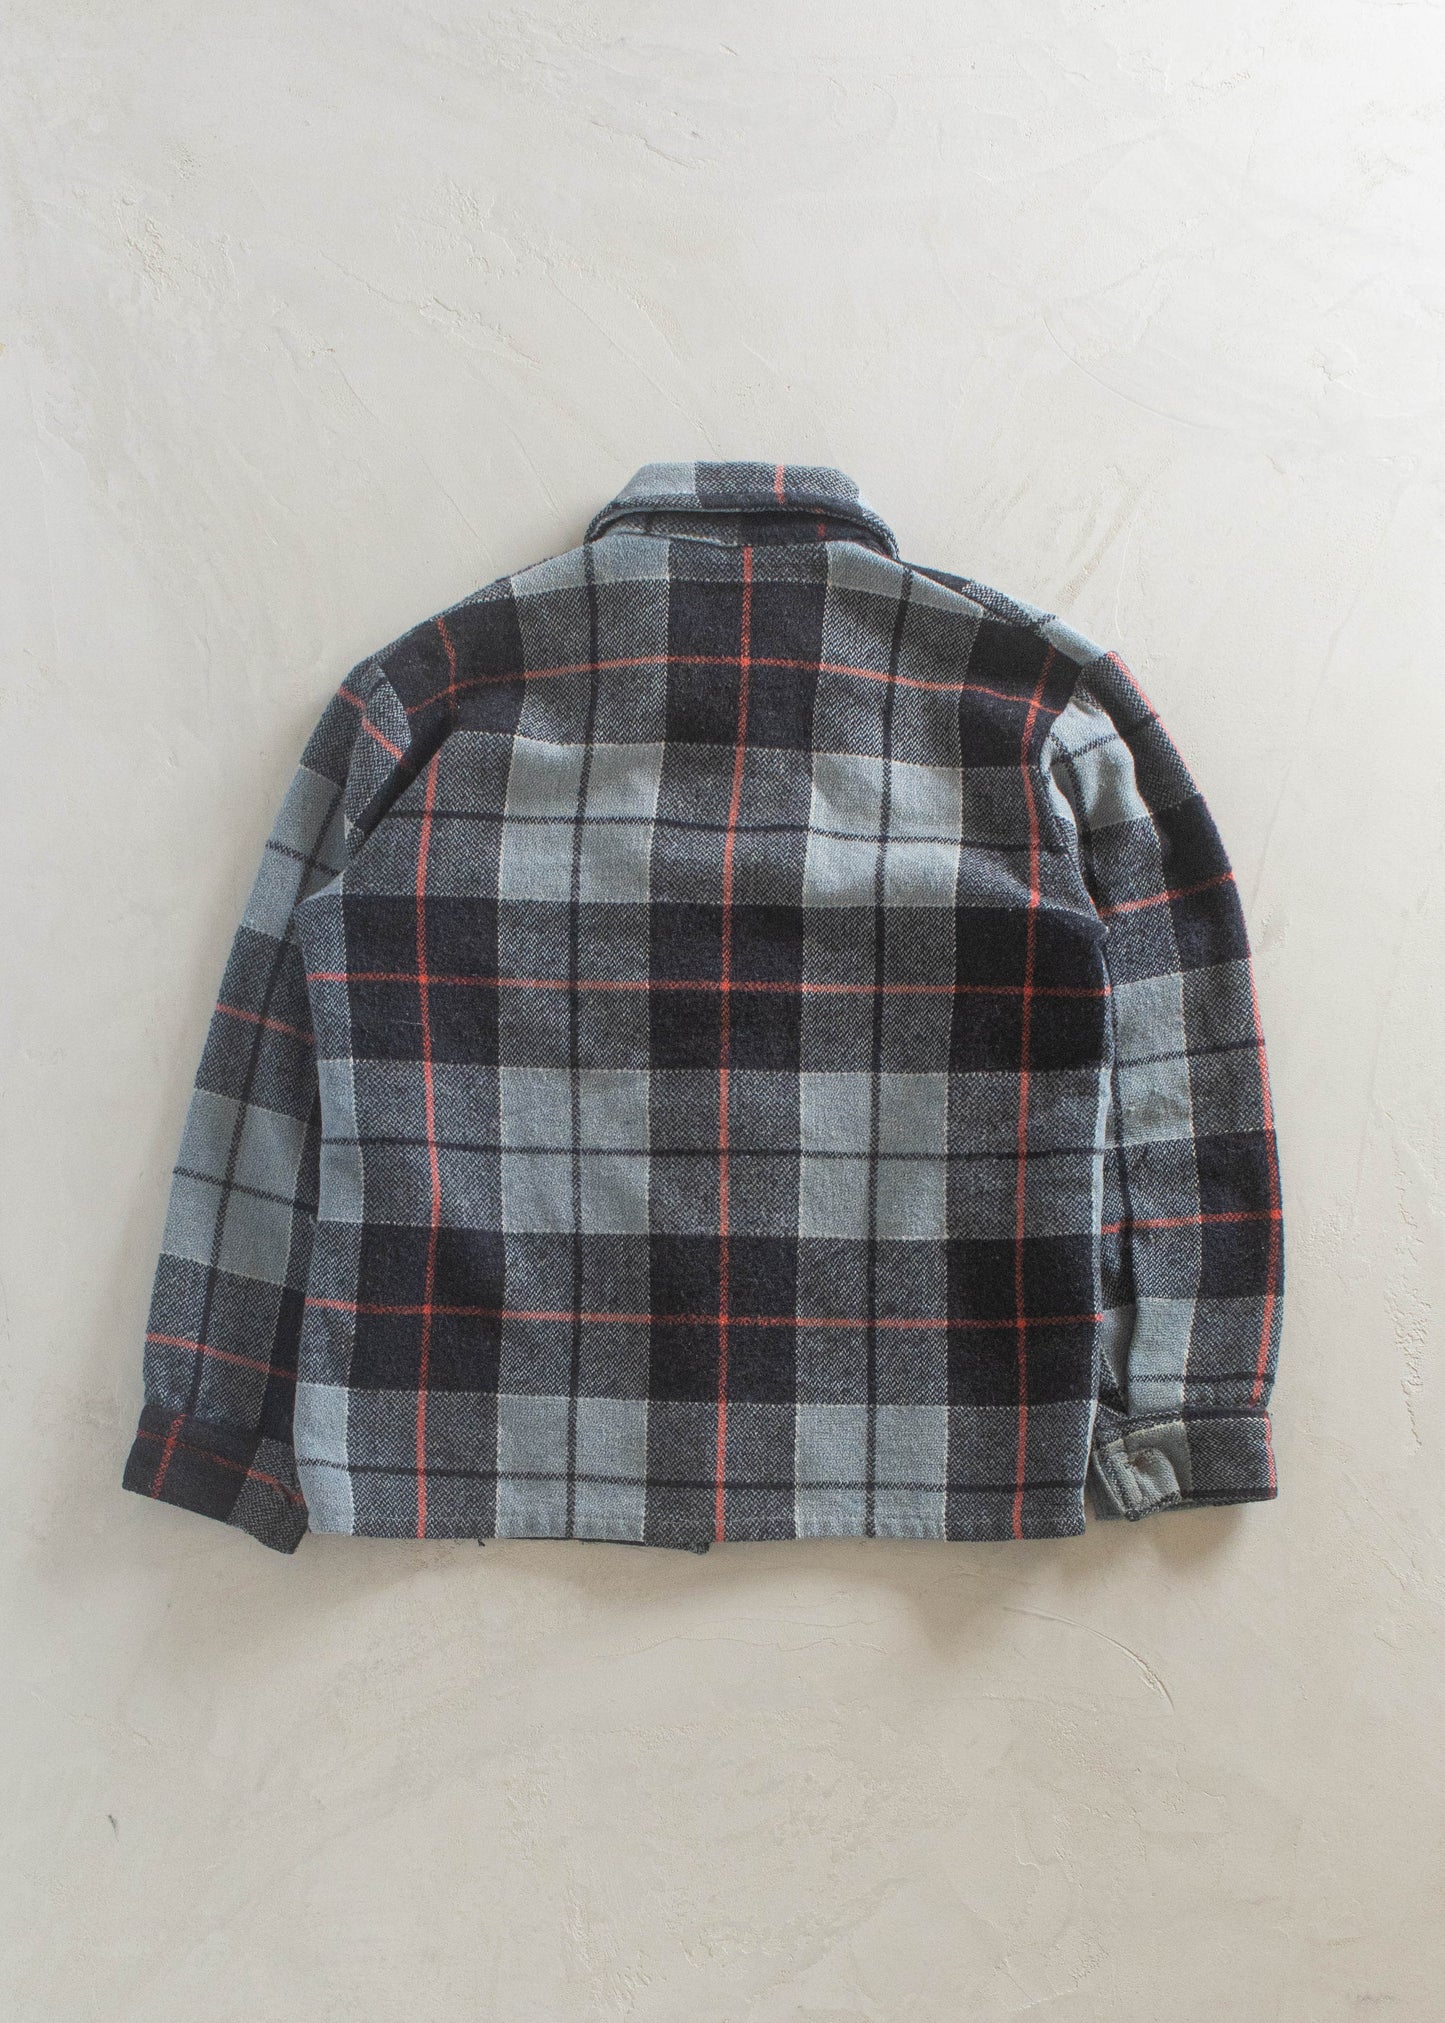 1980s Wool Flannel Button Up Shirt Size M/L